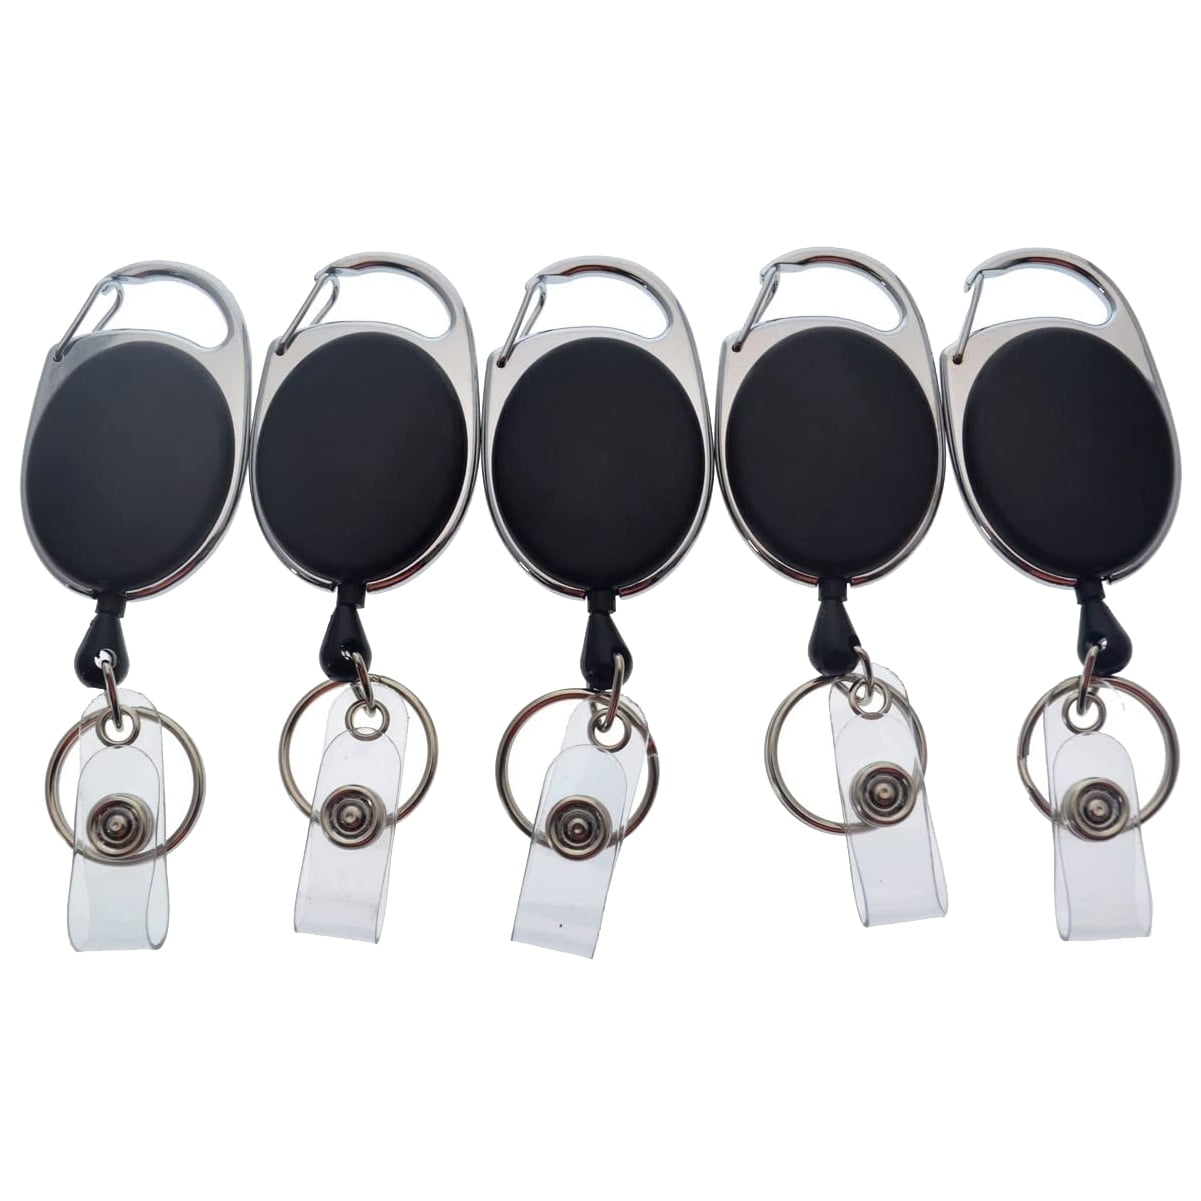 5 Pack - Premium Retractable Oval Shaped Badge Reels with Carabiner Belt  Loop Clip, Keychain and ID Holder Strap by Specialist ID (Solid Black)